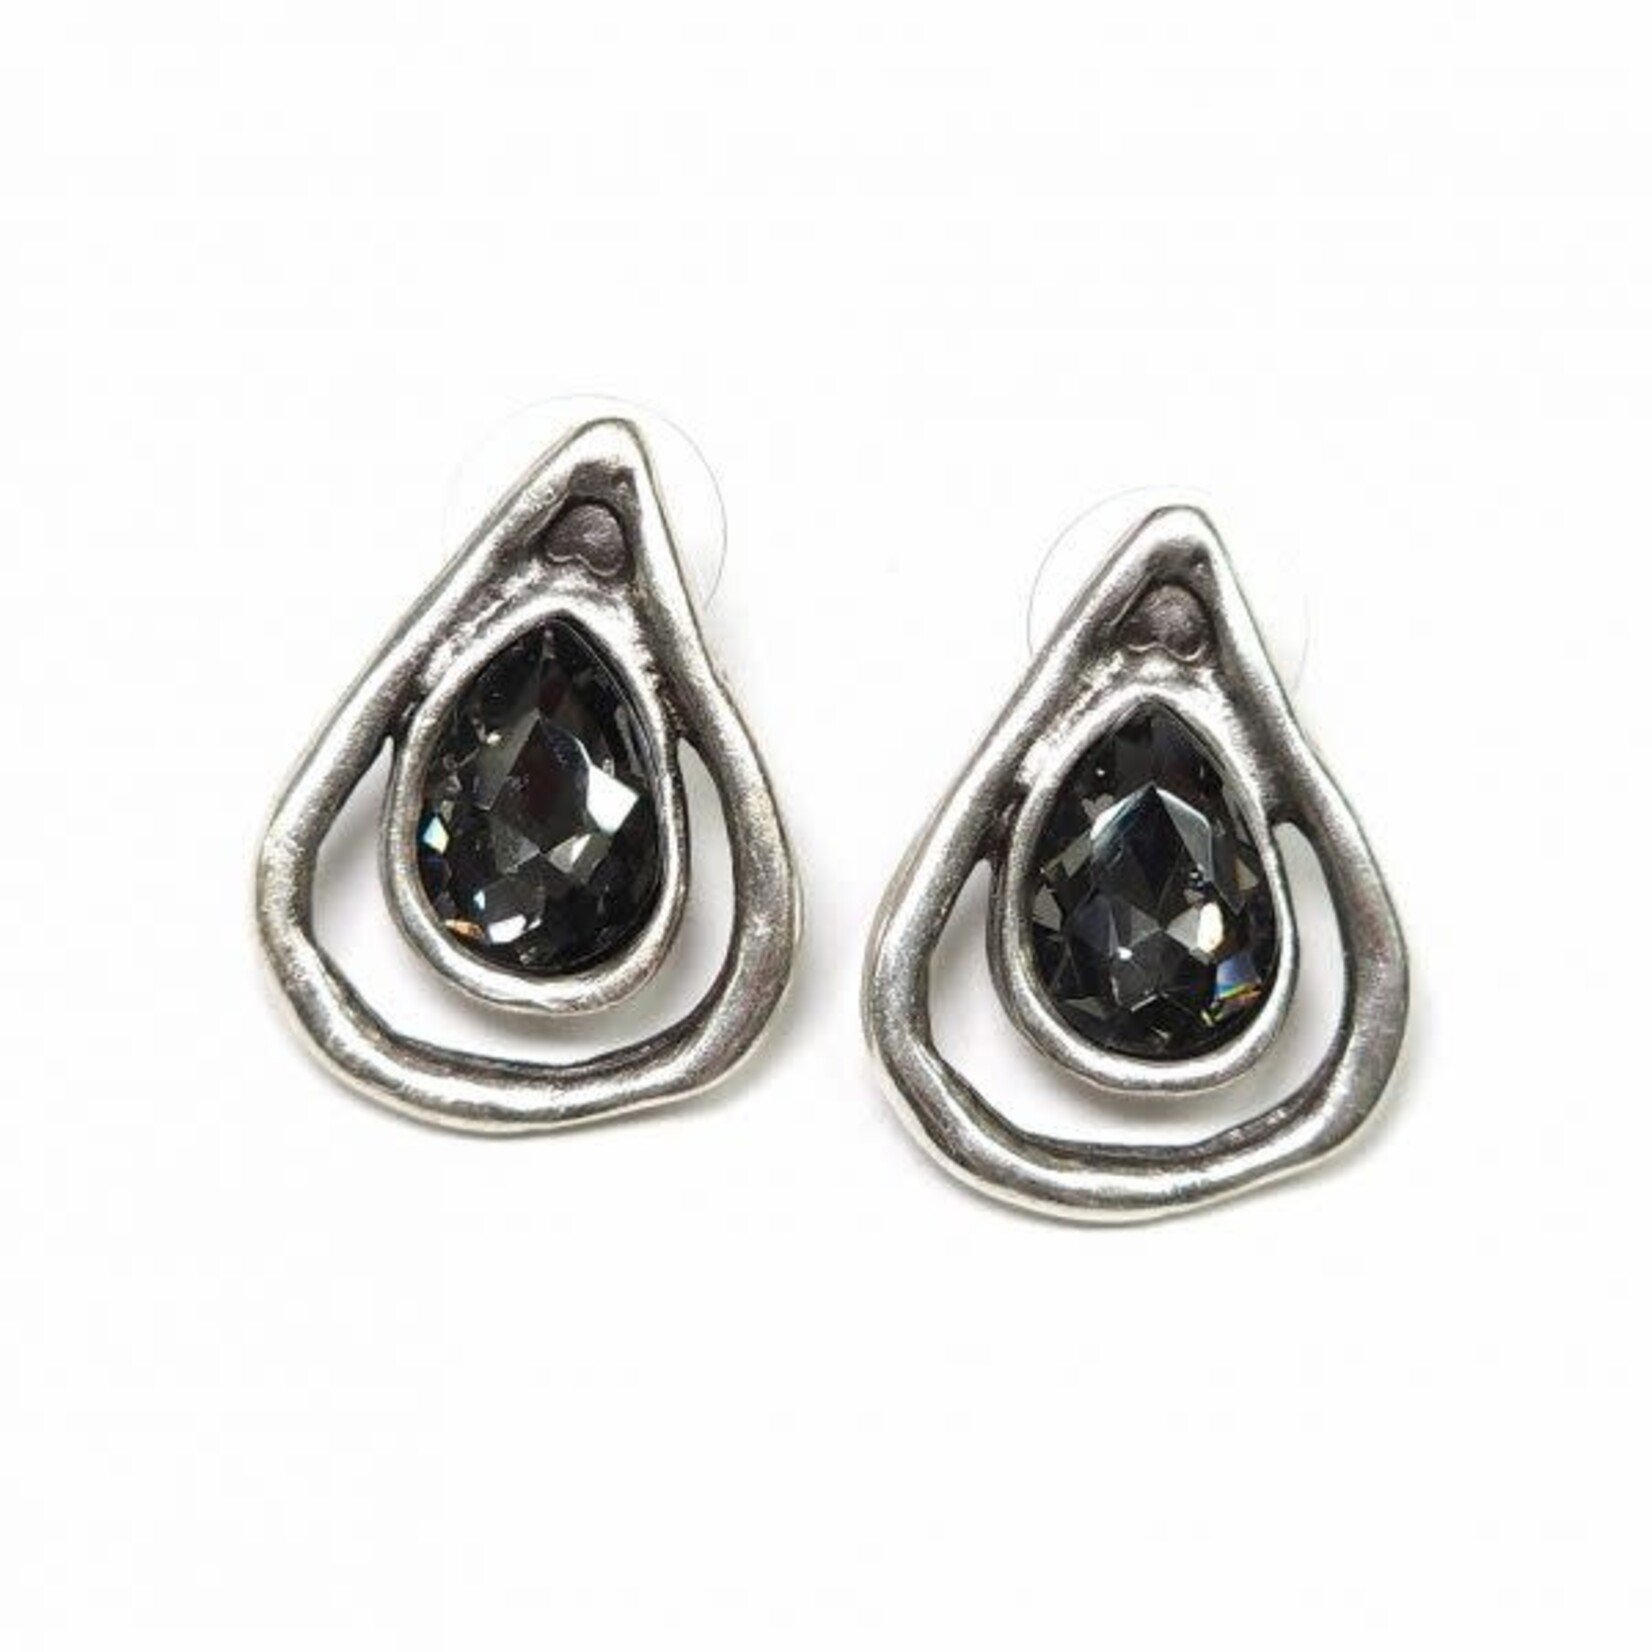 The Ancient Bazaar Pewter Earrings Stud Drop w/ Smokey Gray Crystals